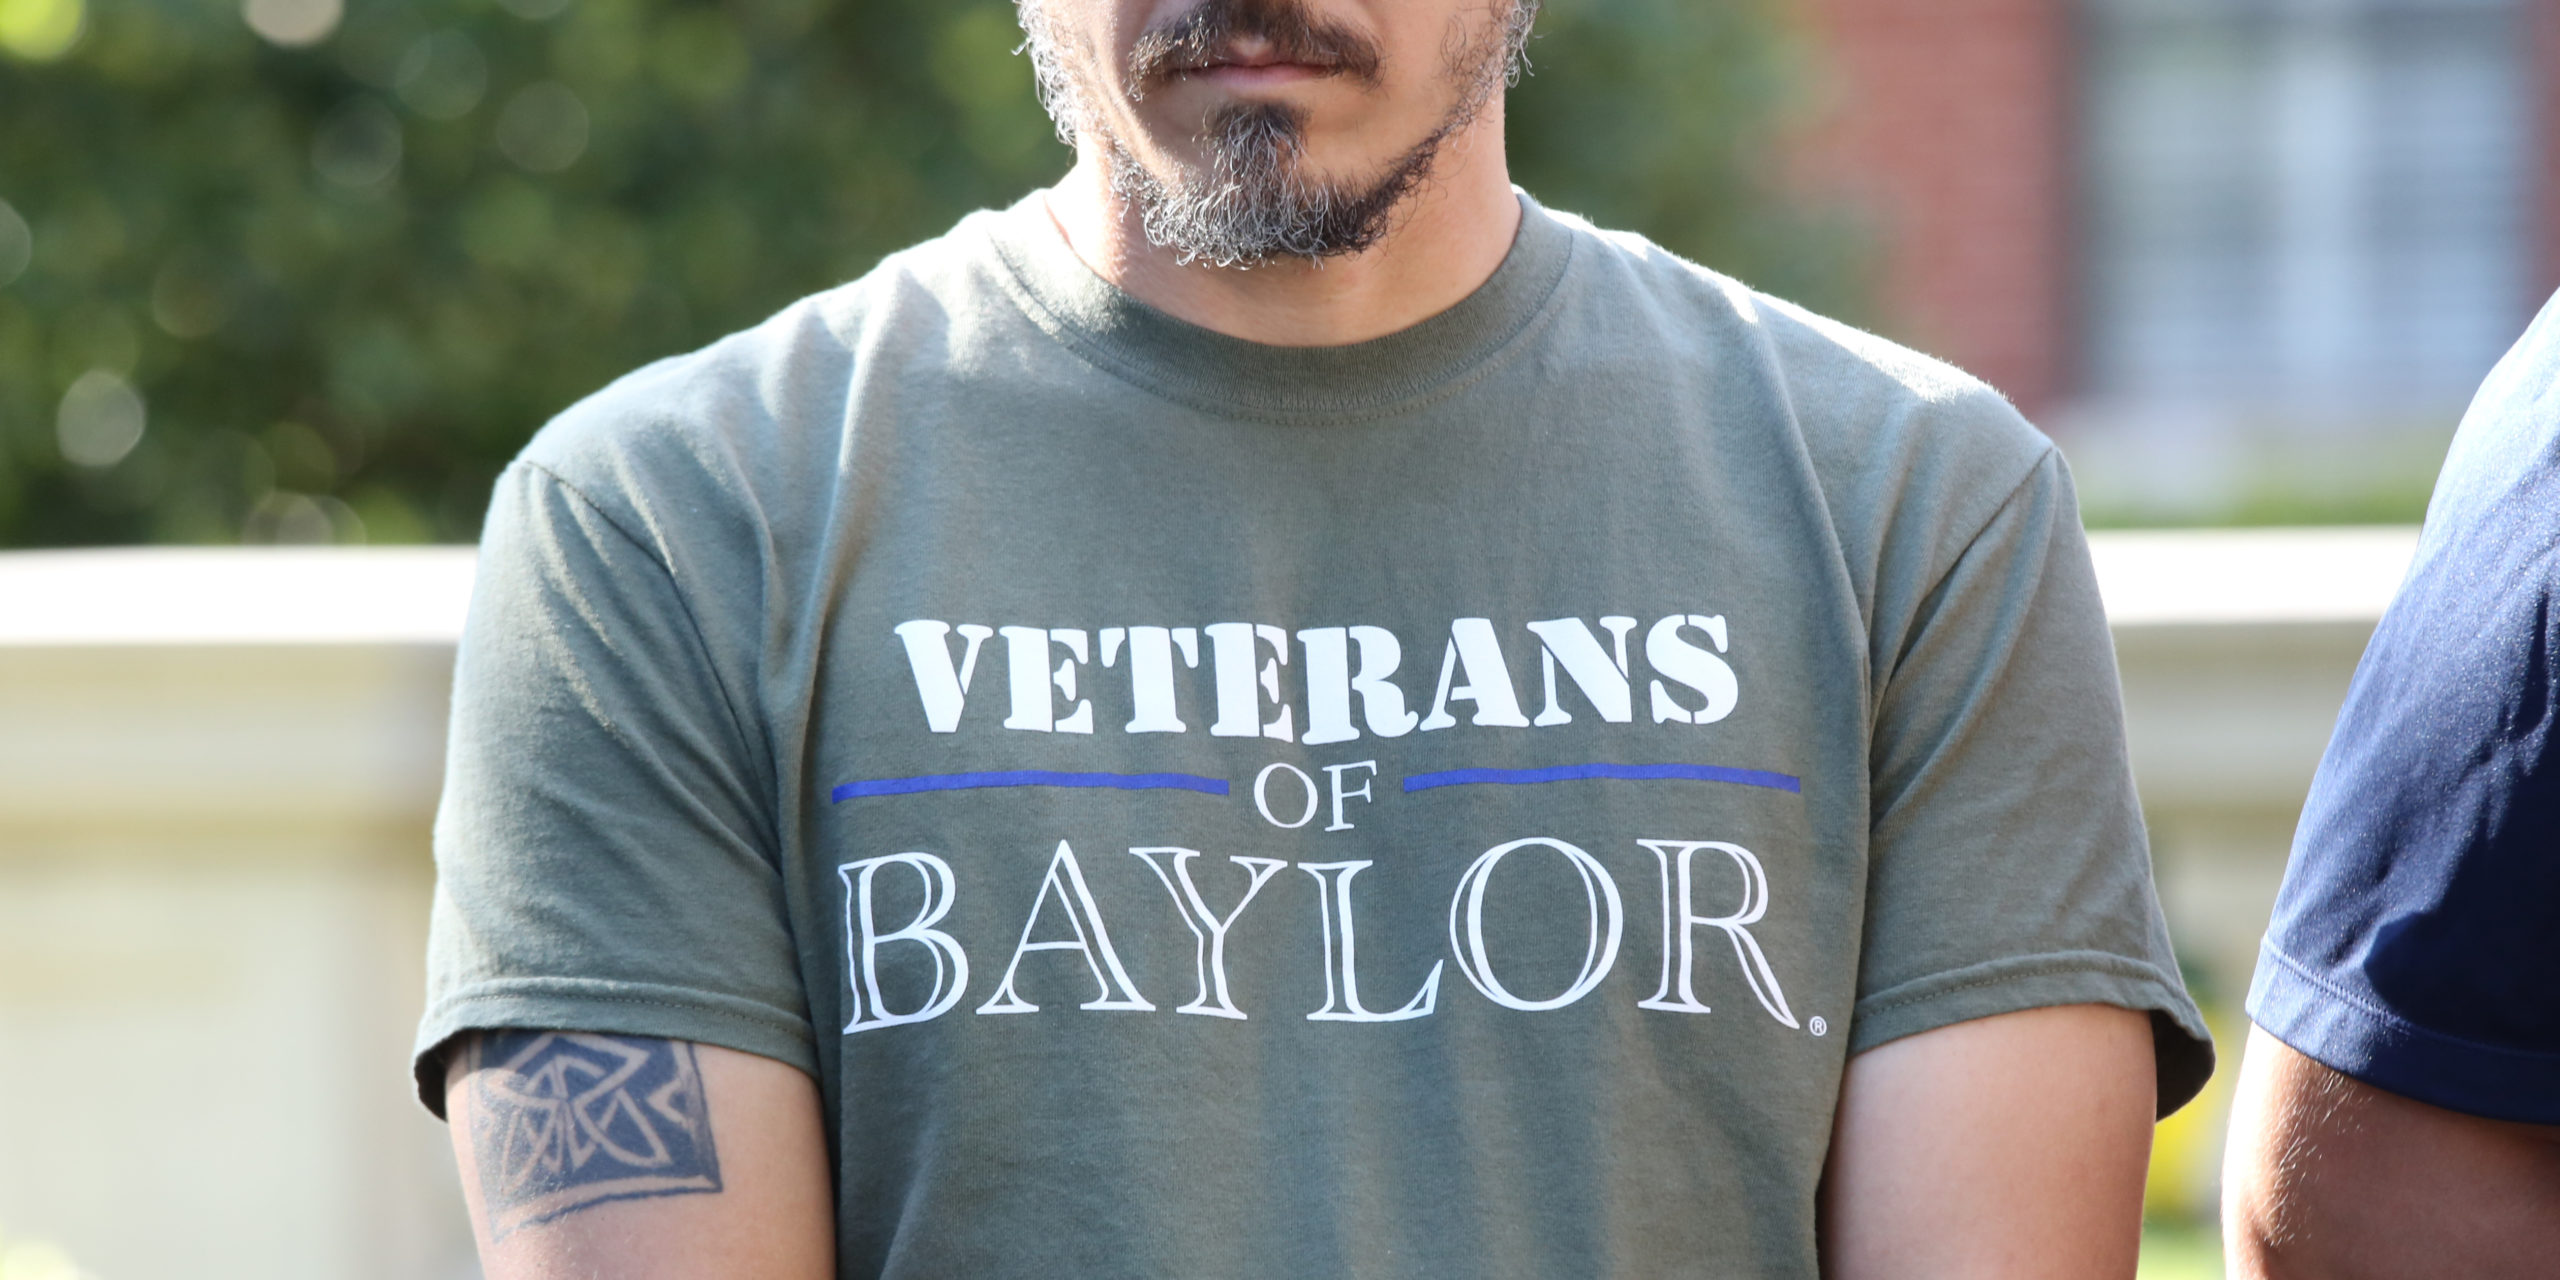 A man in a "Veterans of Baylor" t-shirt